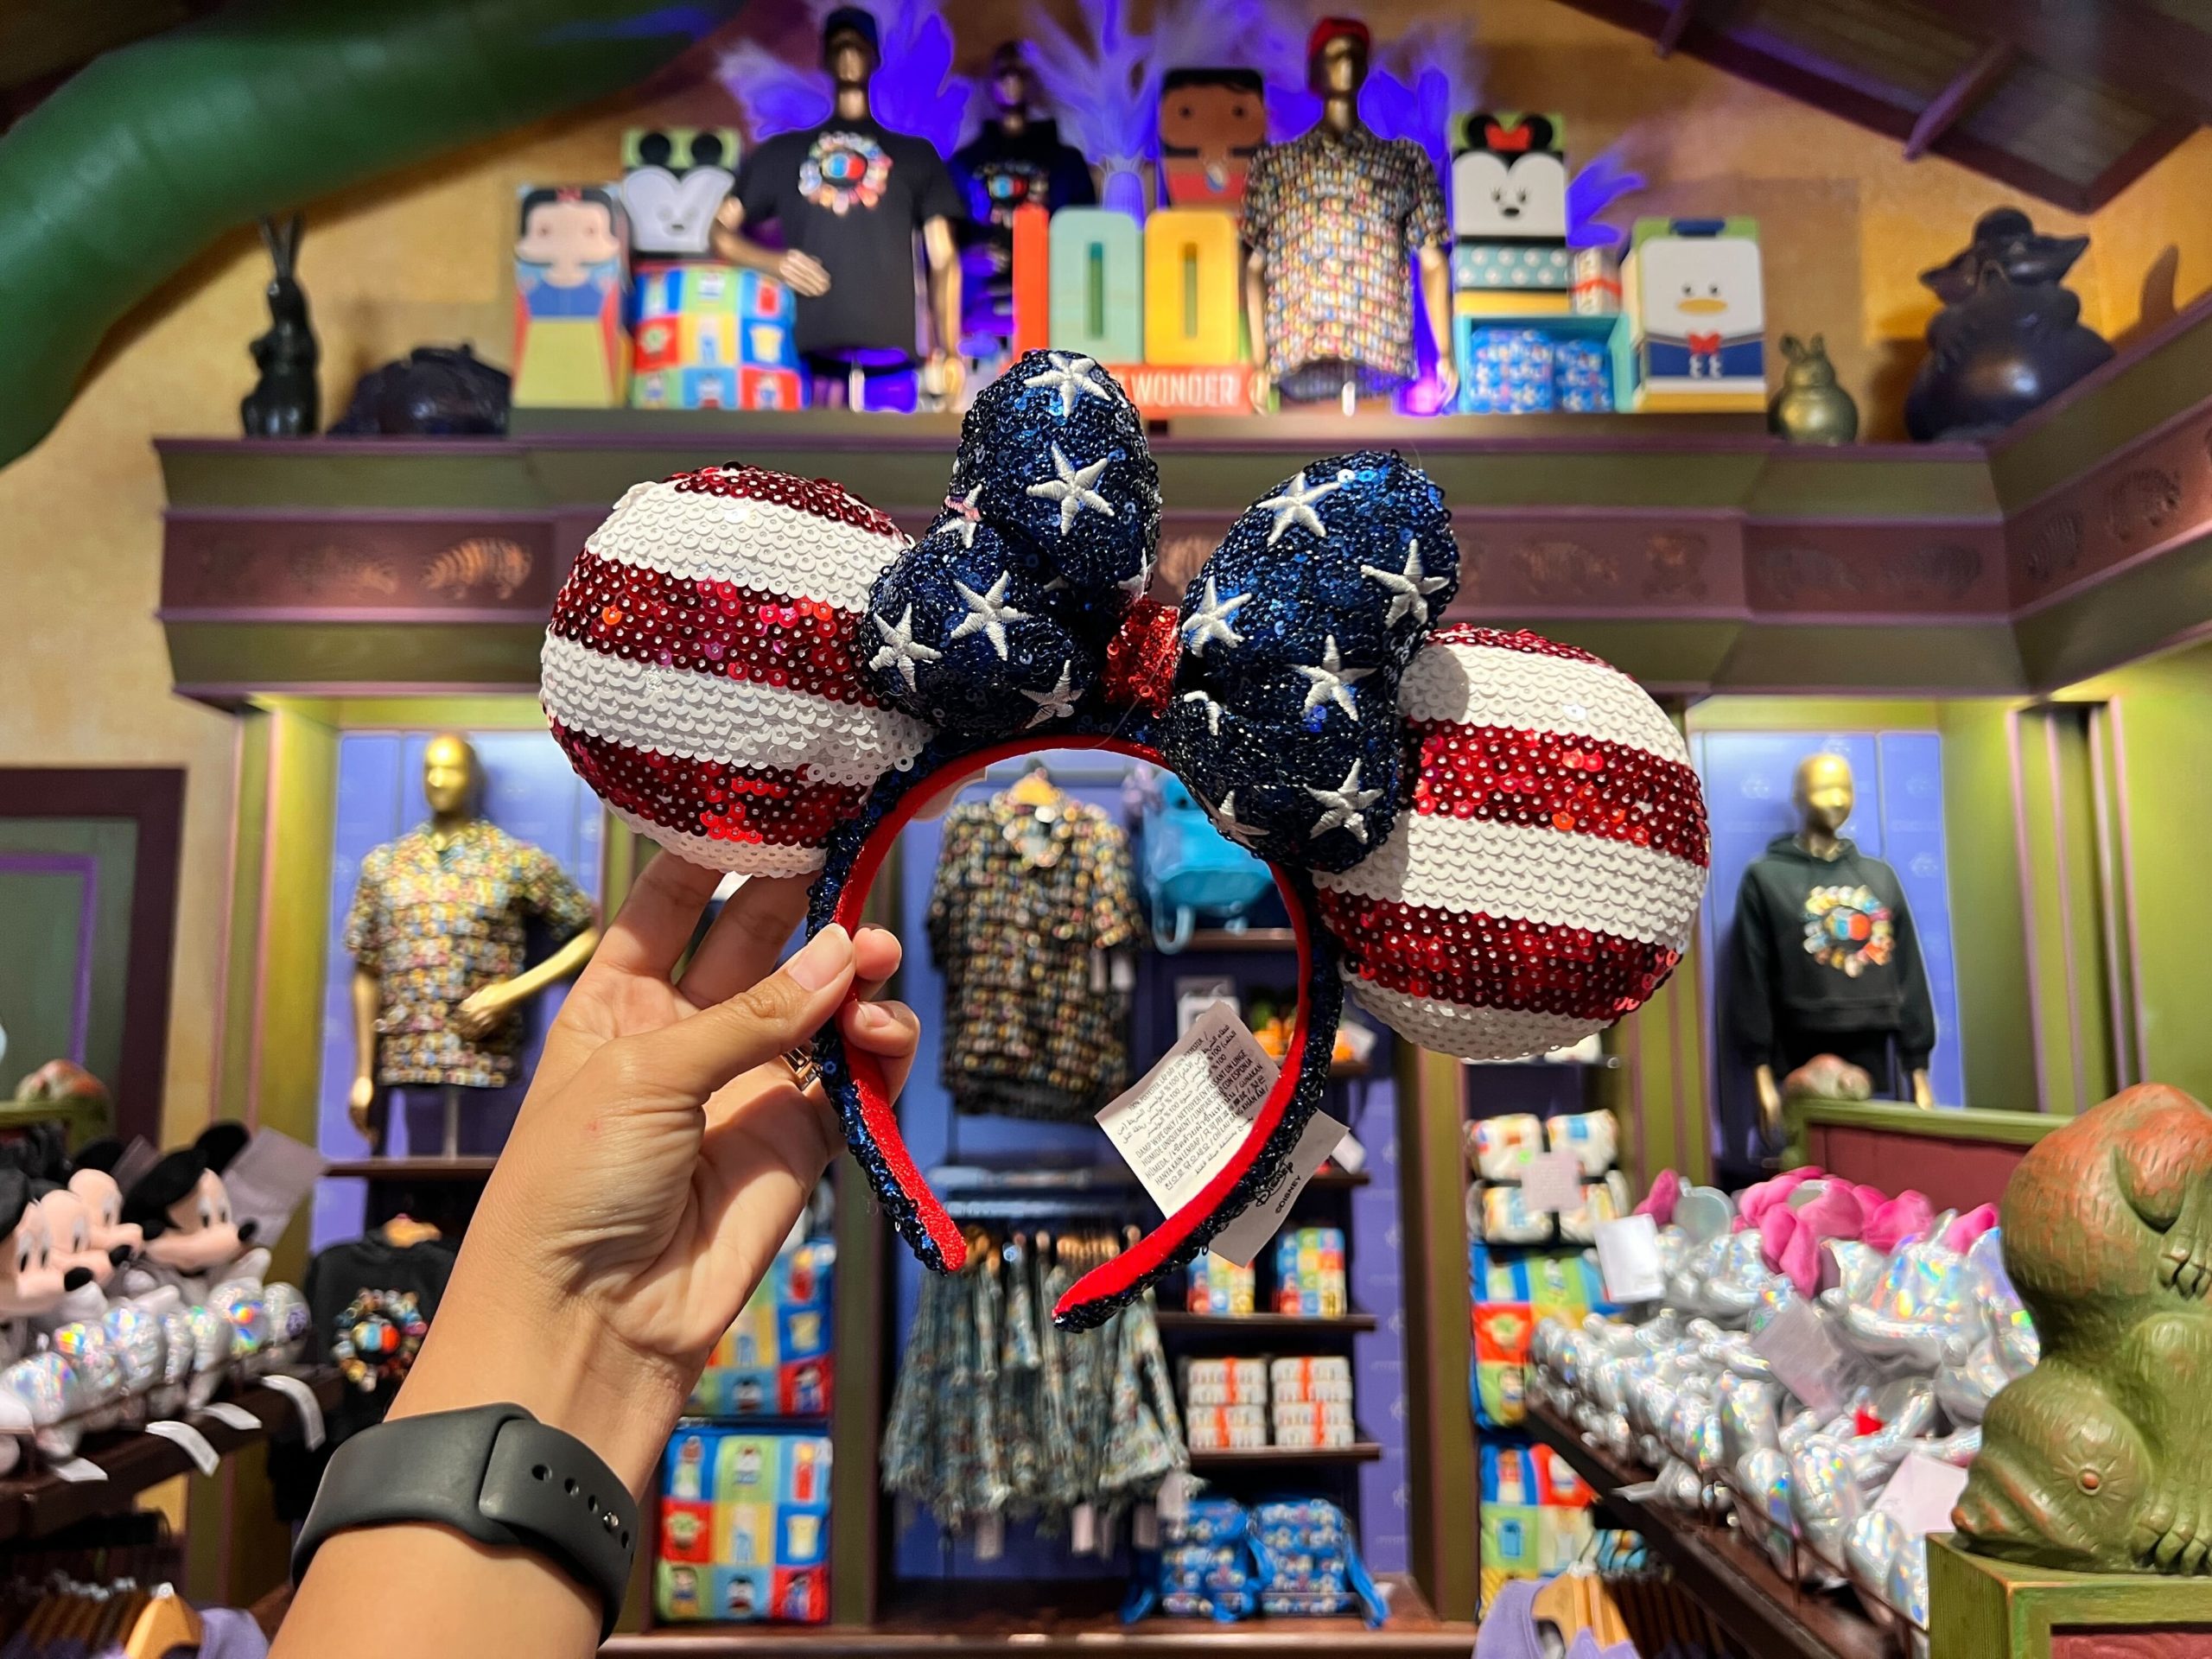 New Stitch Ear Headband Spotted At Disney Springs!